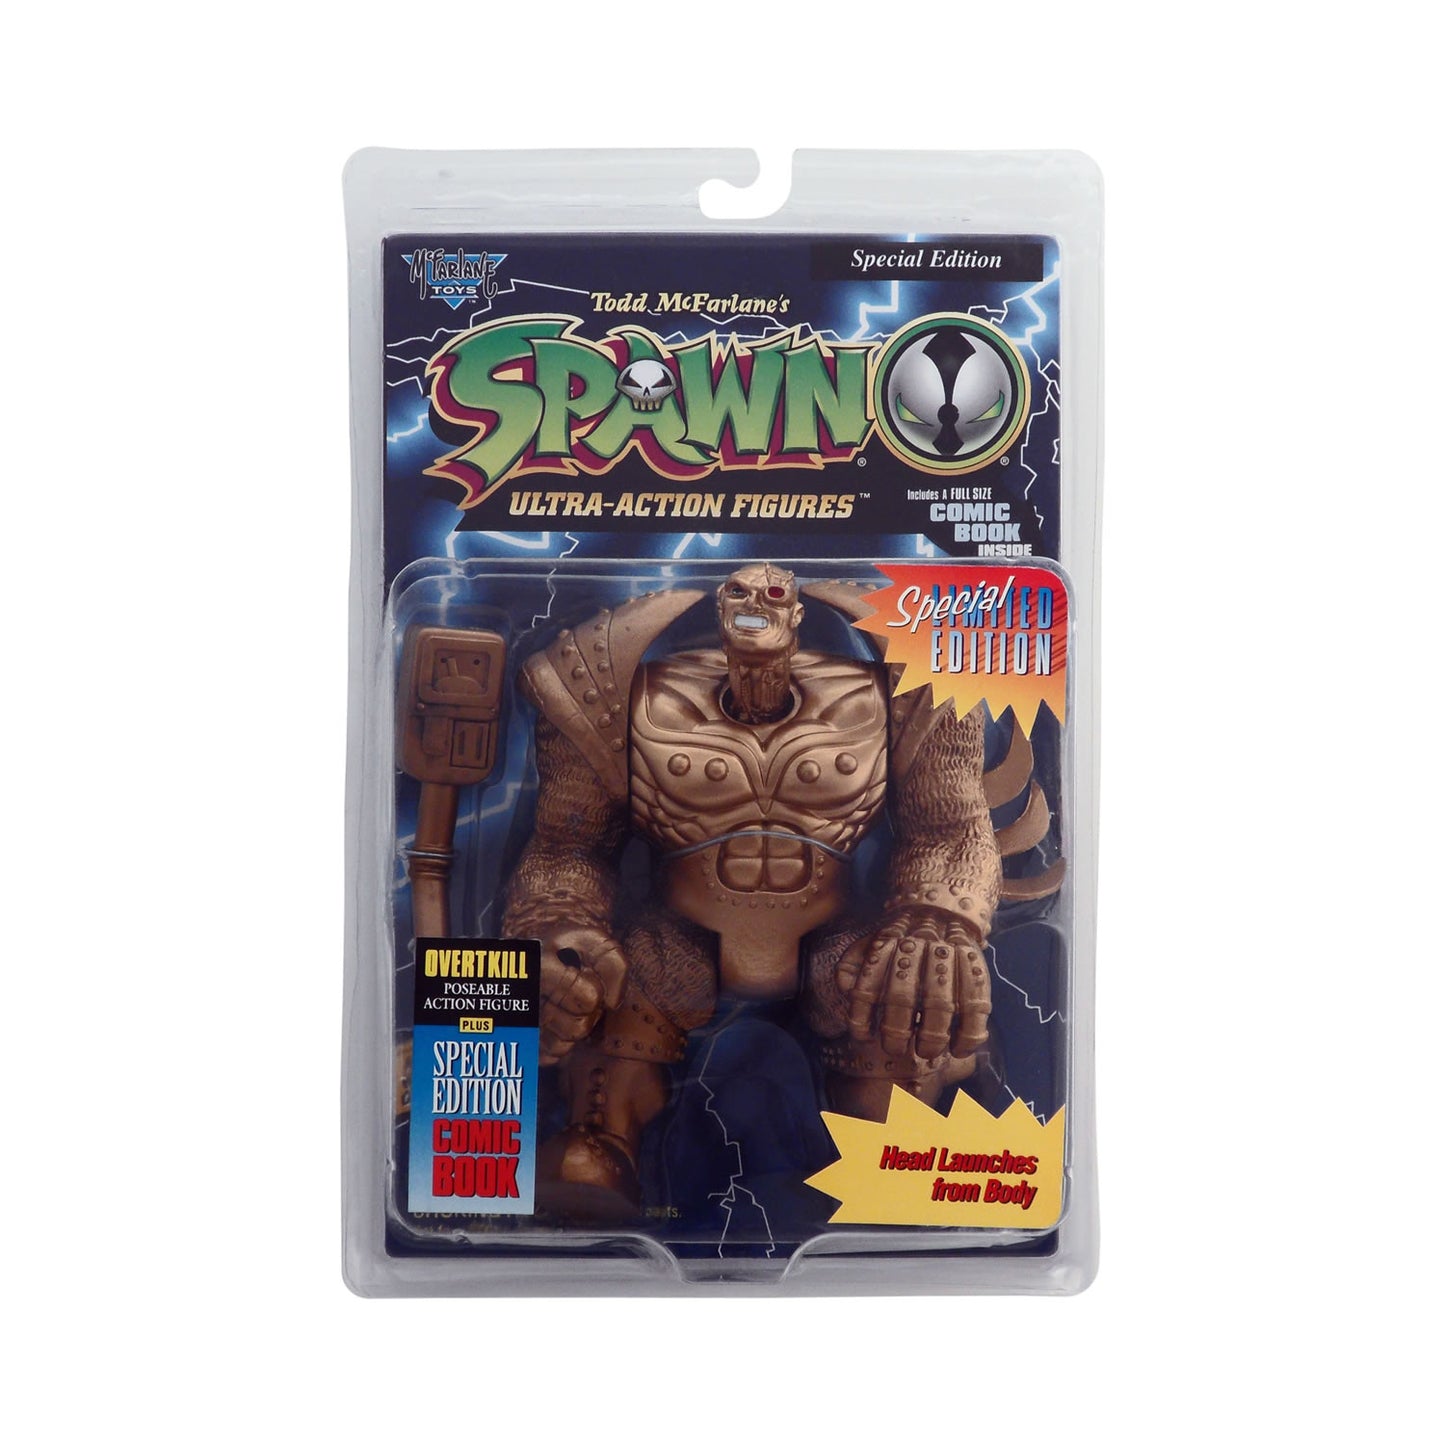 Special Edition Gold Overtkill from Todd McFarlane's Spawn